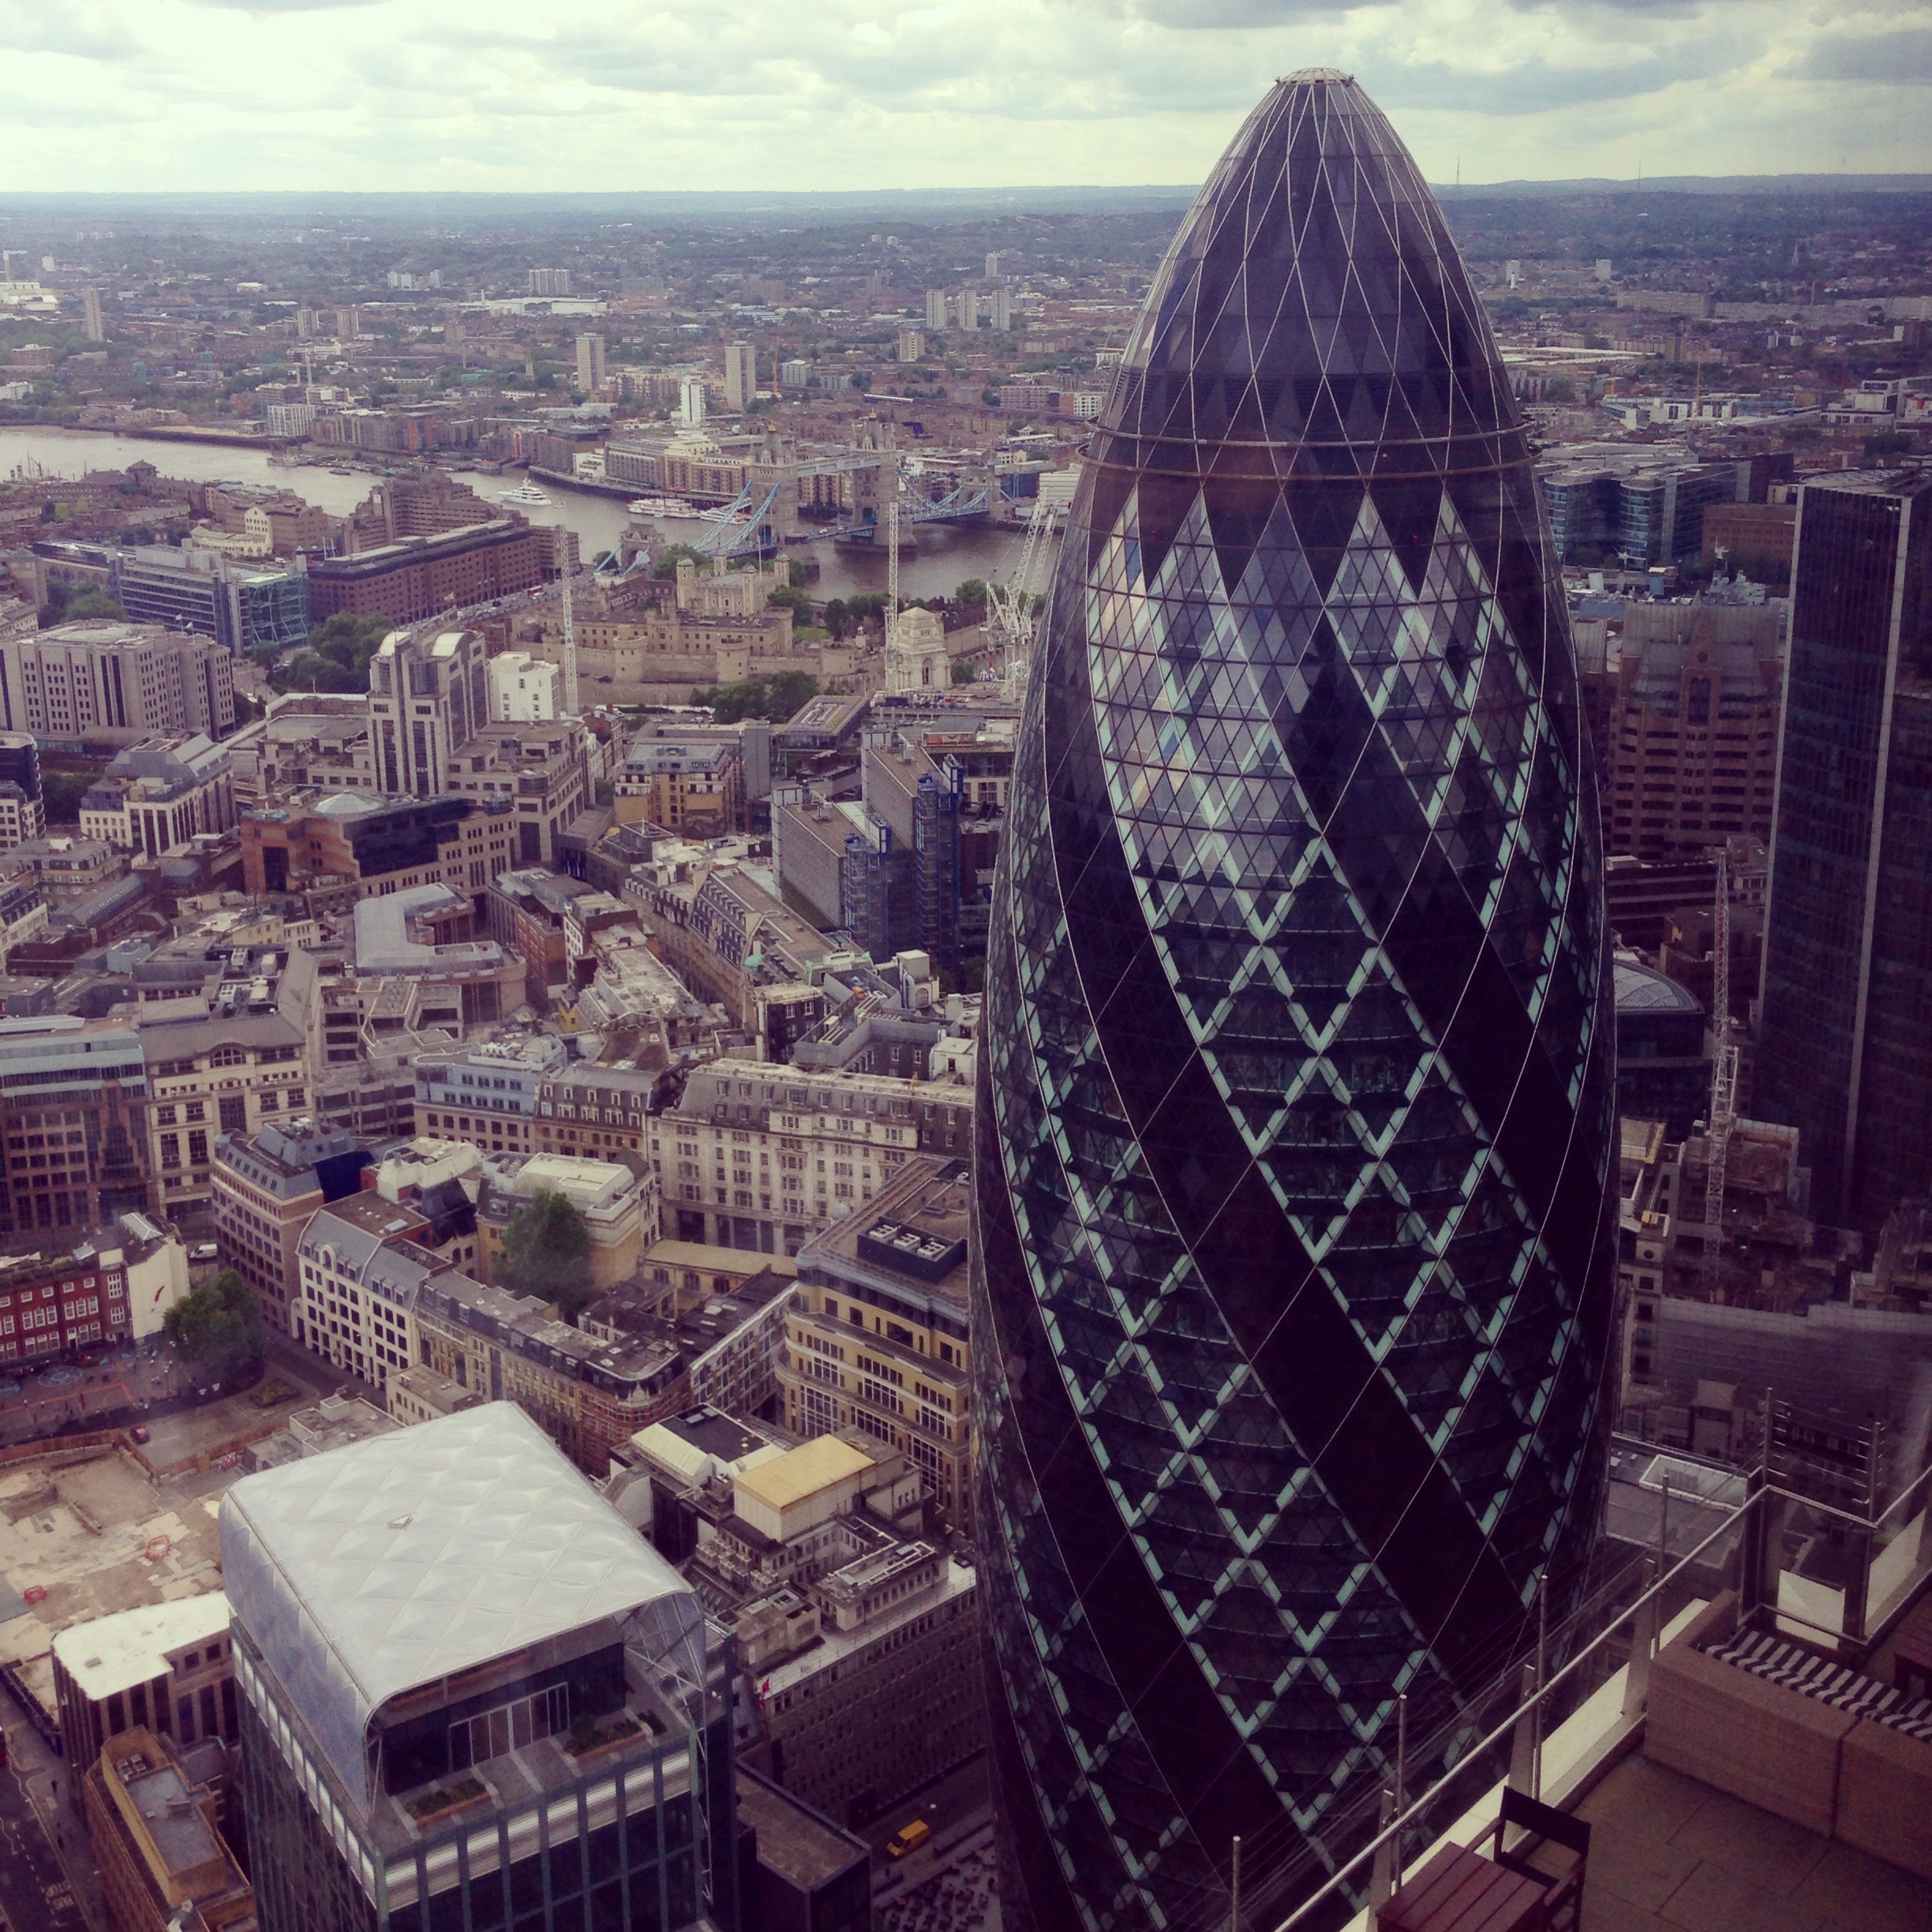 "Not a bad view of London during lunch today #100happydays 16/100"